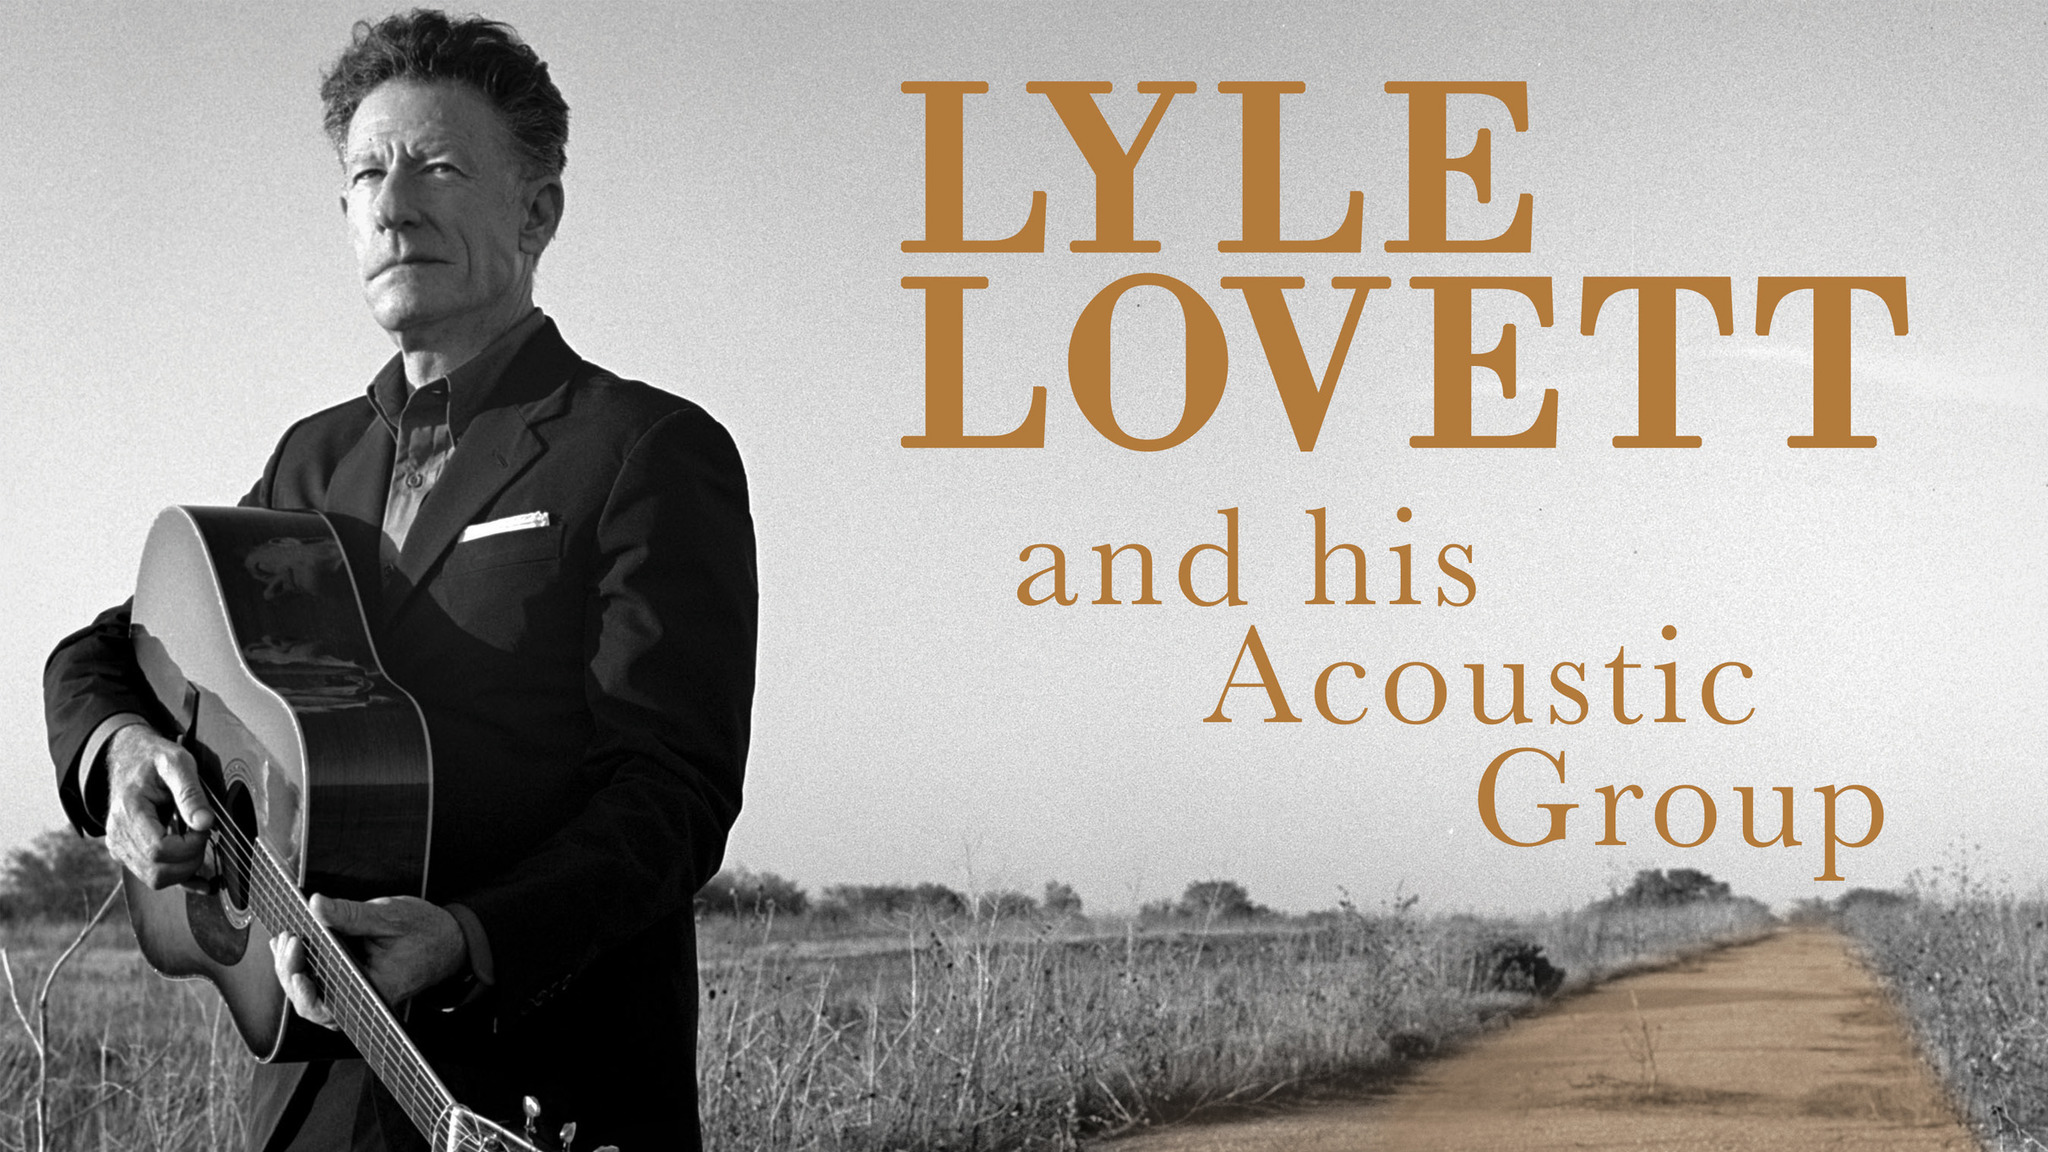 Lyle Lovett and his Acoustic Group Tickets, 20222023 Concert Tour